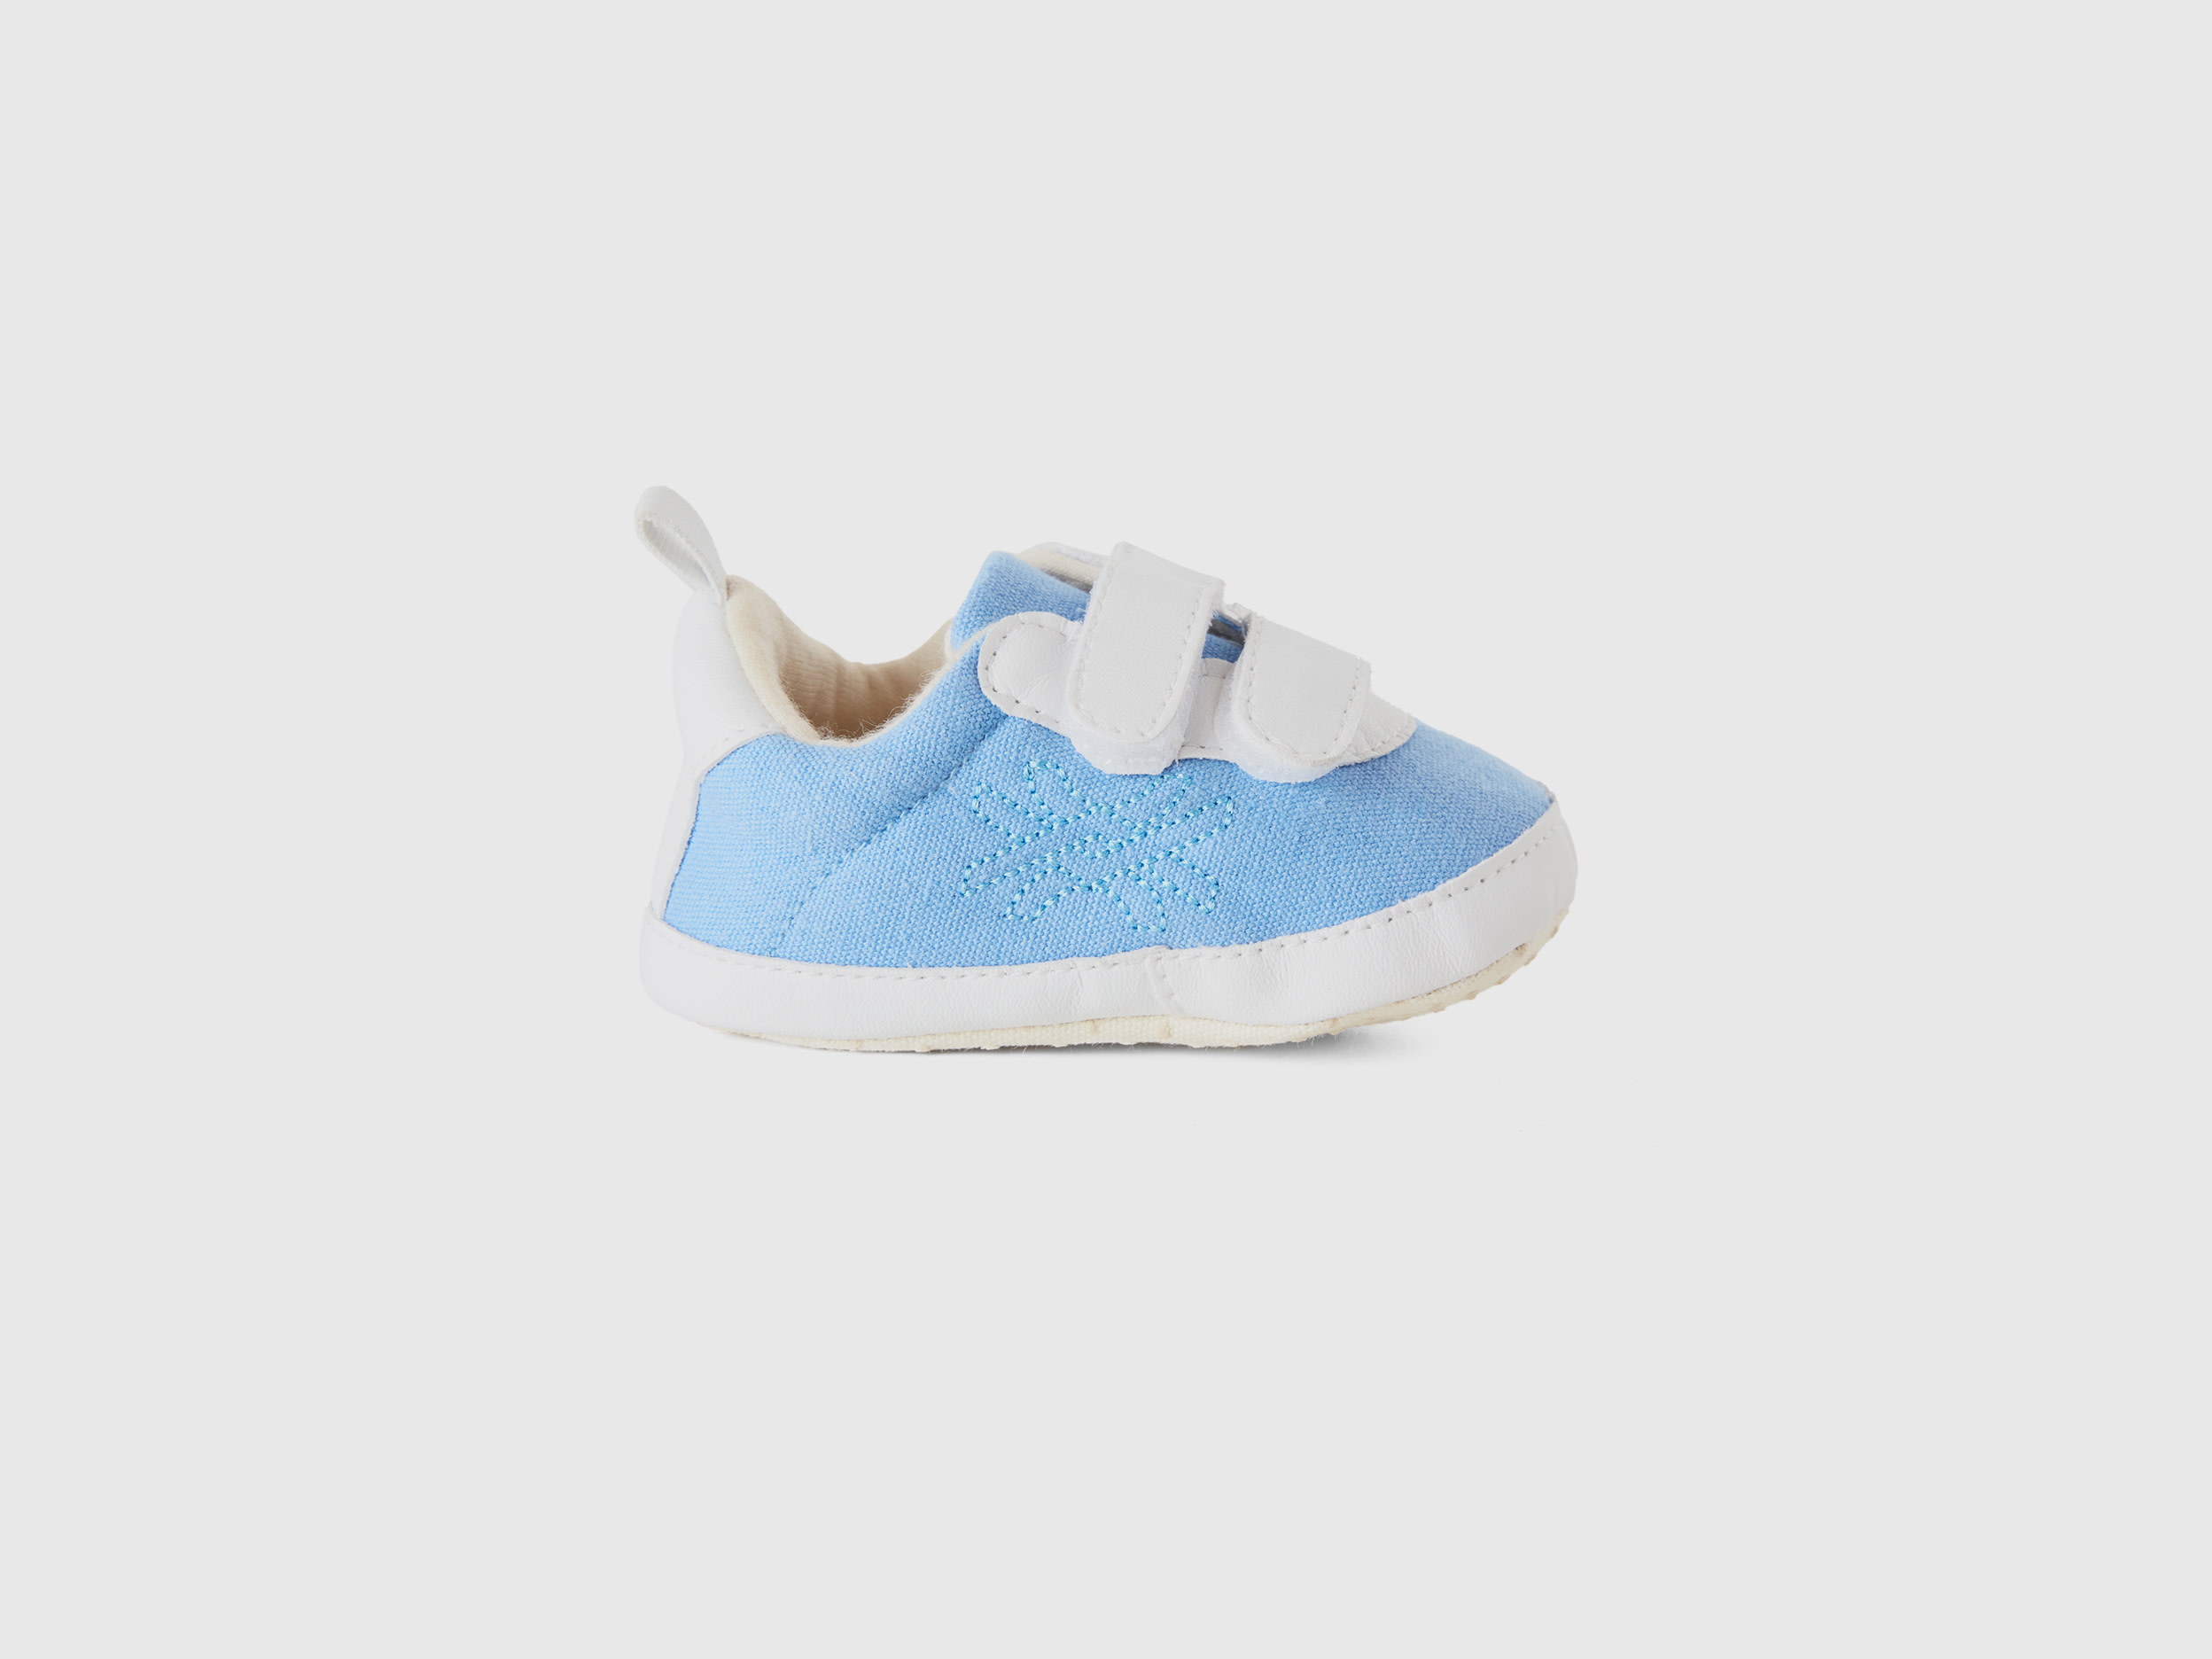 Benetton, First Steps Shoes In Canvas, size 3C, Sky Blue, Kids